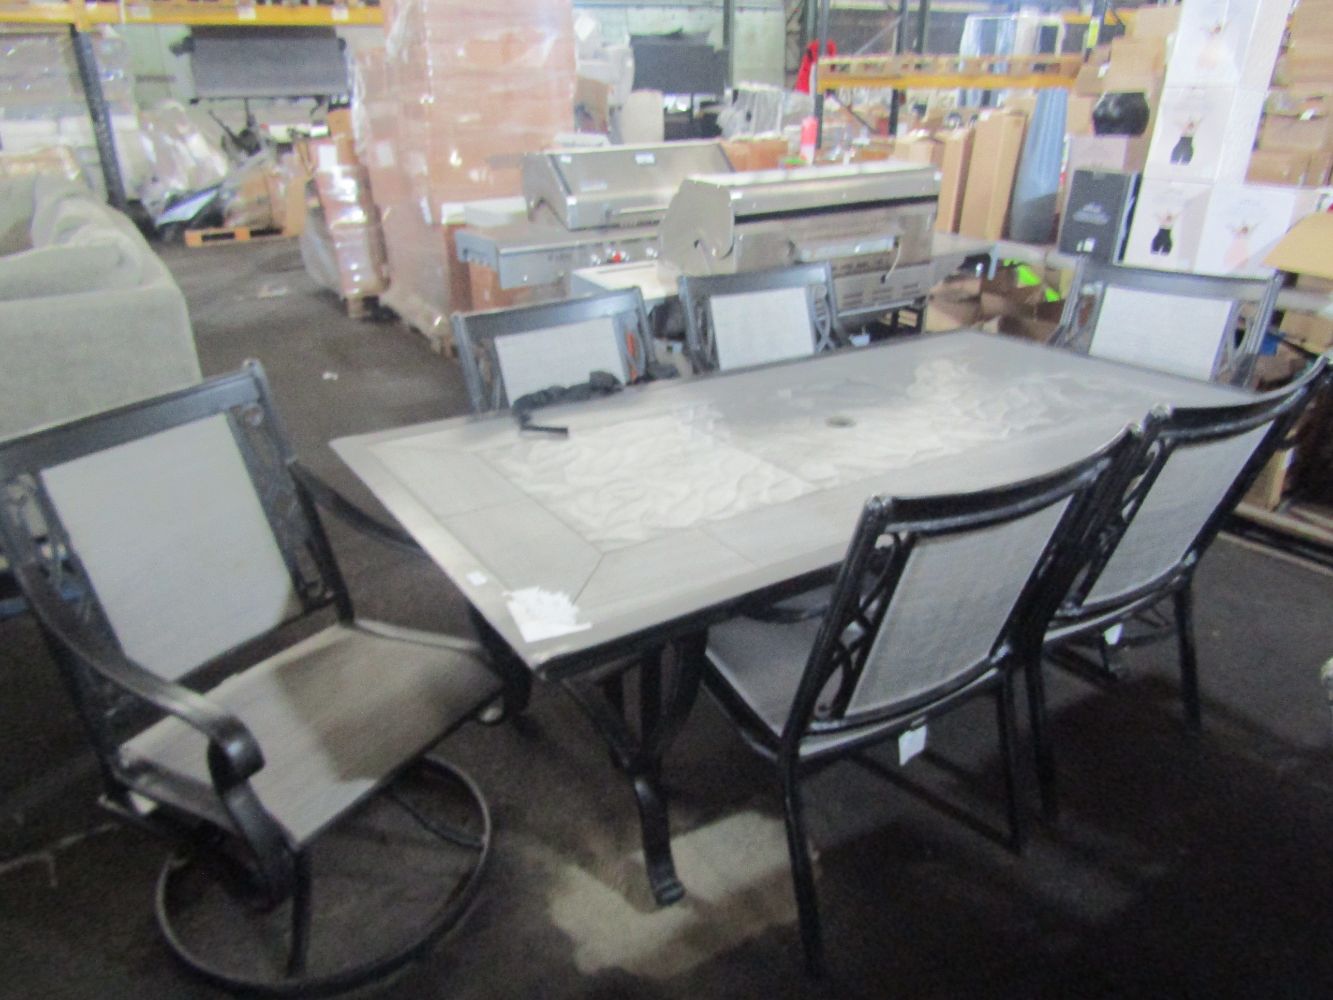 Thursday Furniture featuring Garden sets, BBQ's, soft furnishing's and more